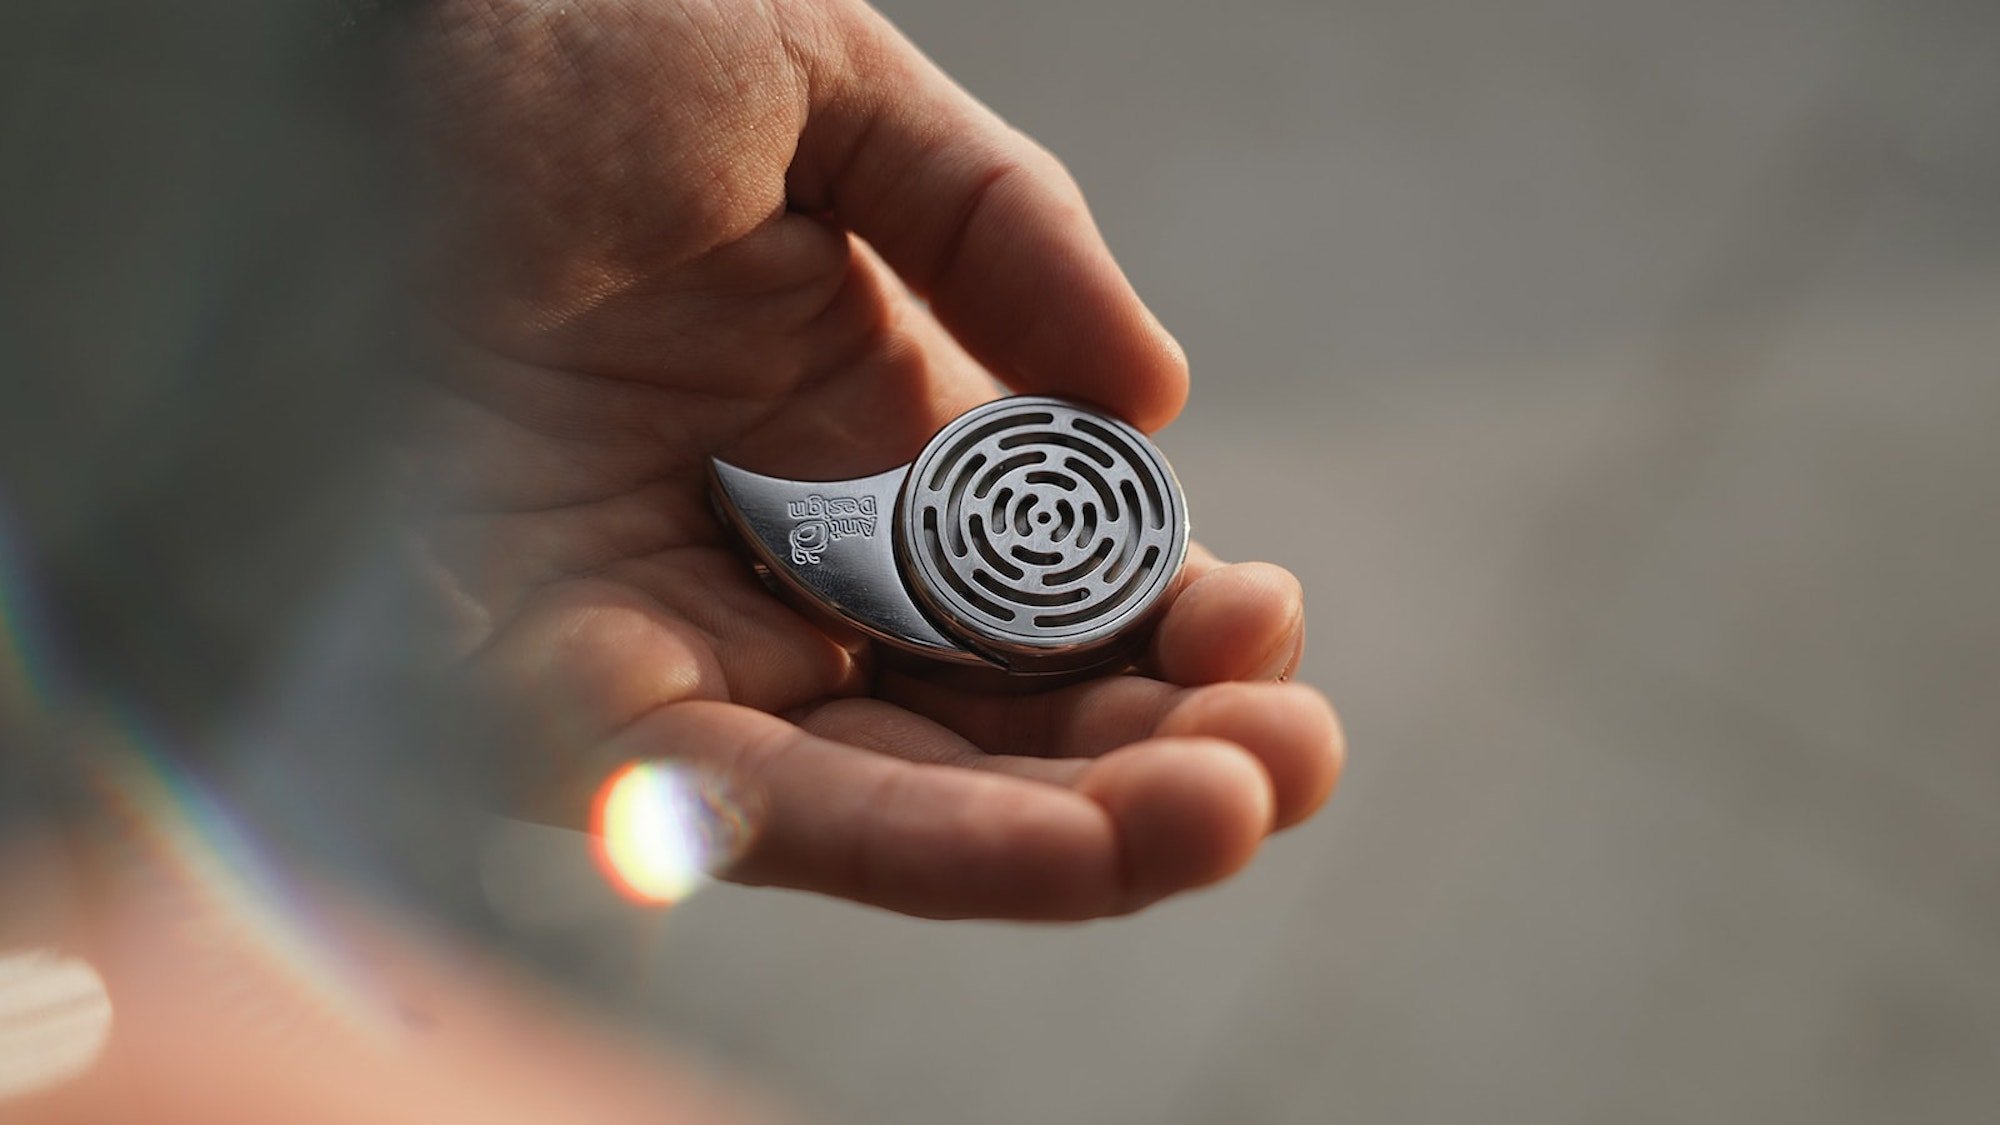 This unique fidget toy is what you need to release stress